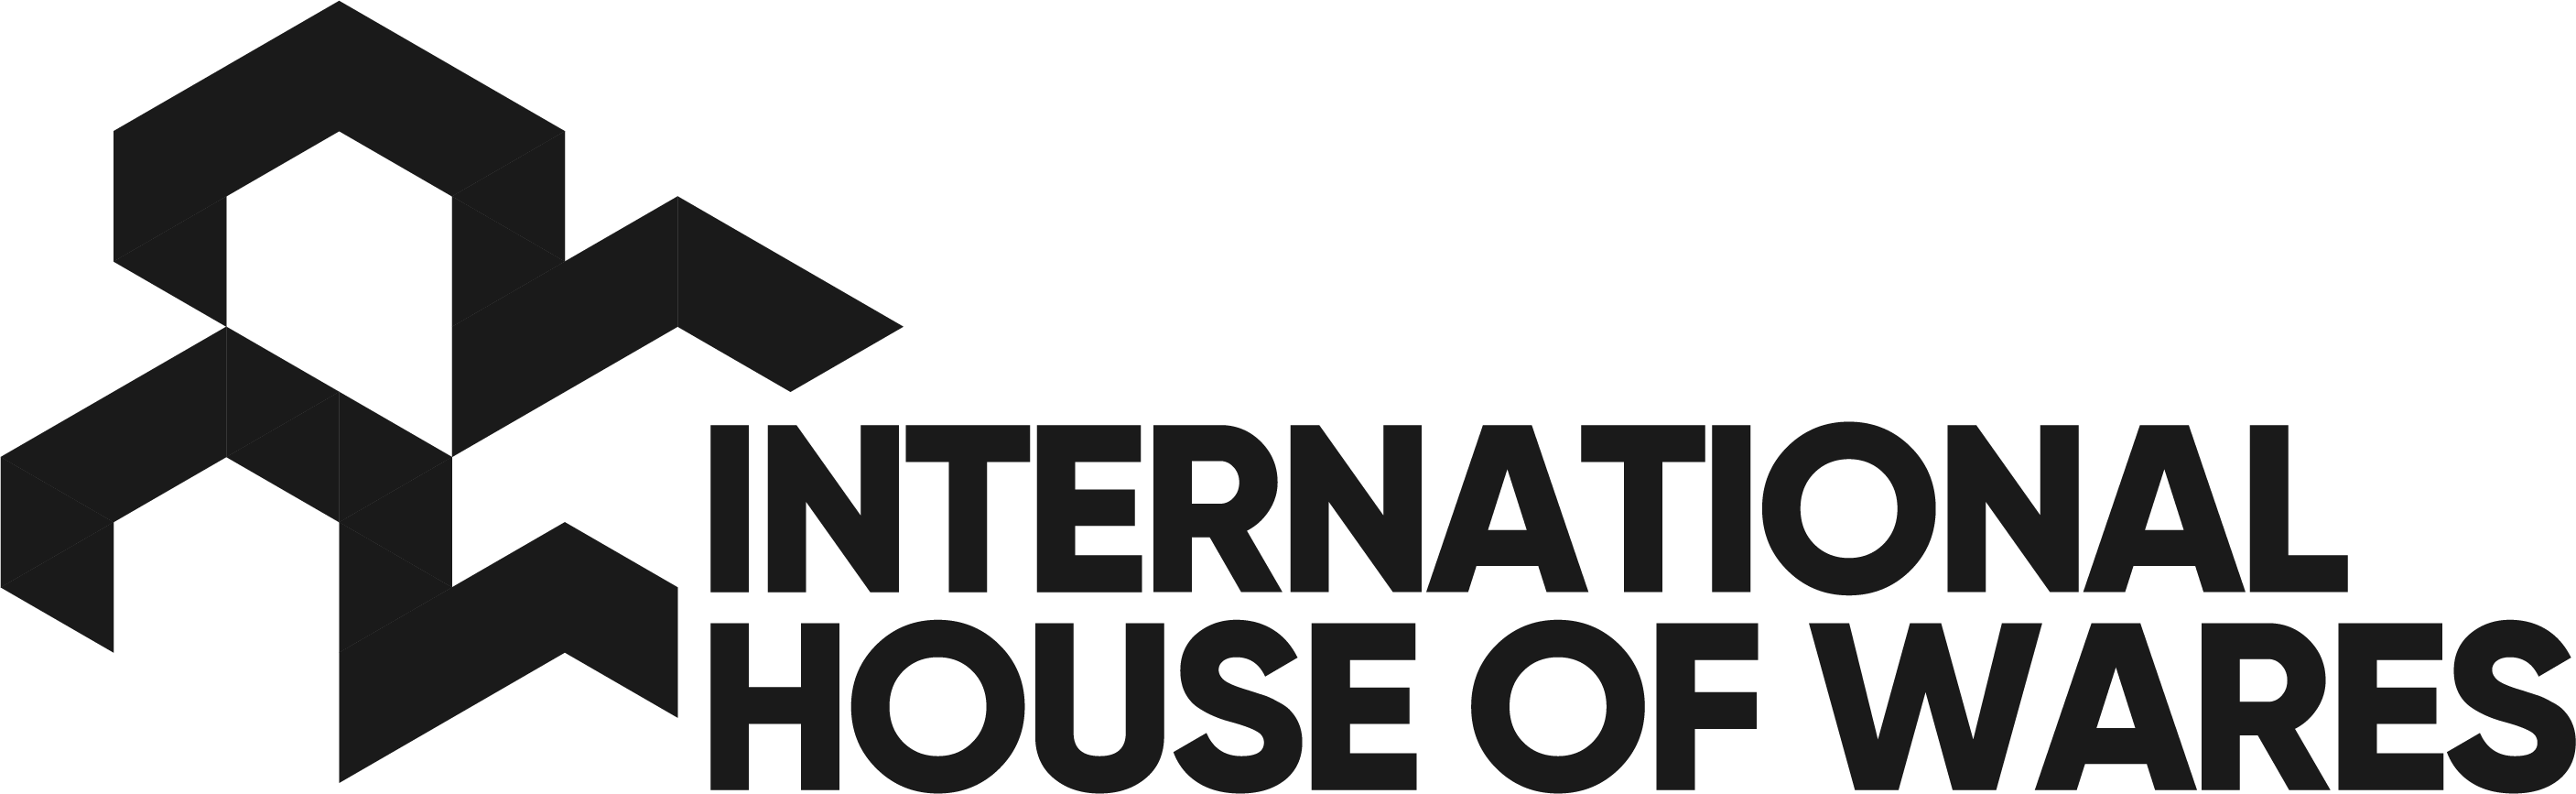 International House Of Wares